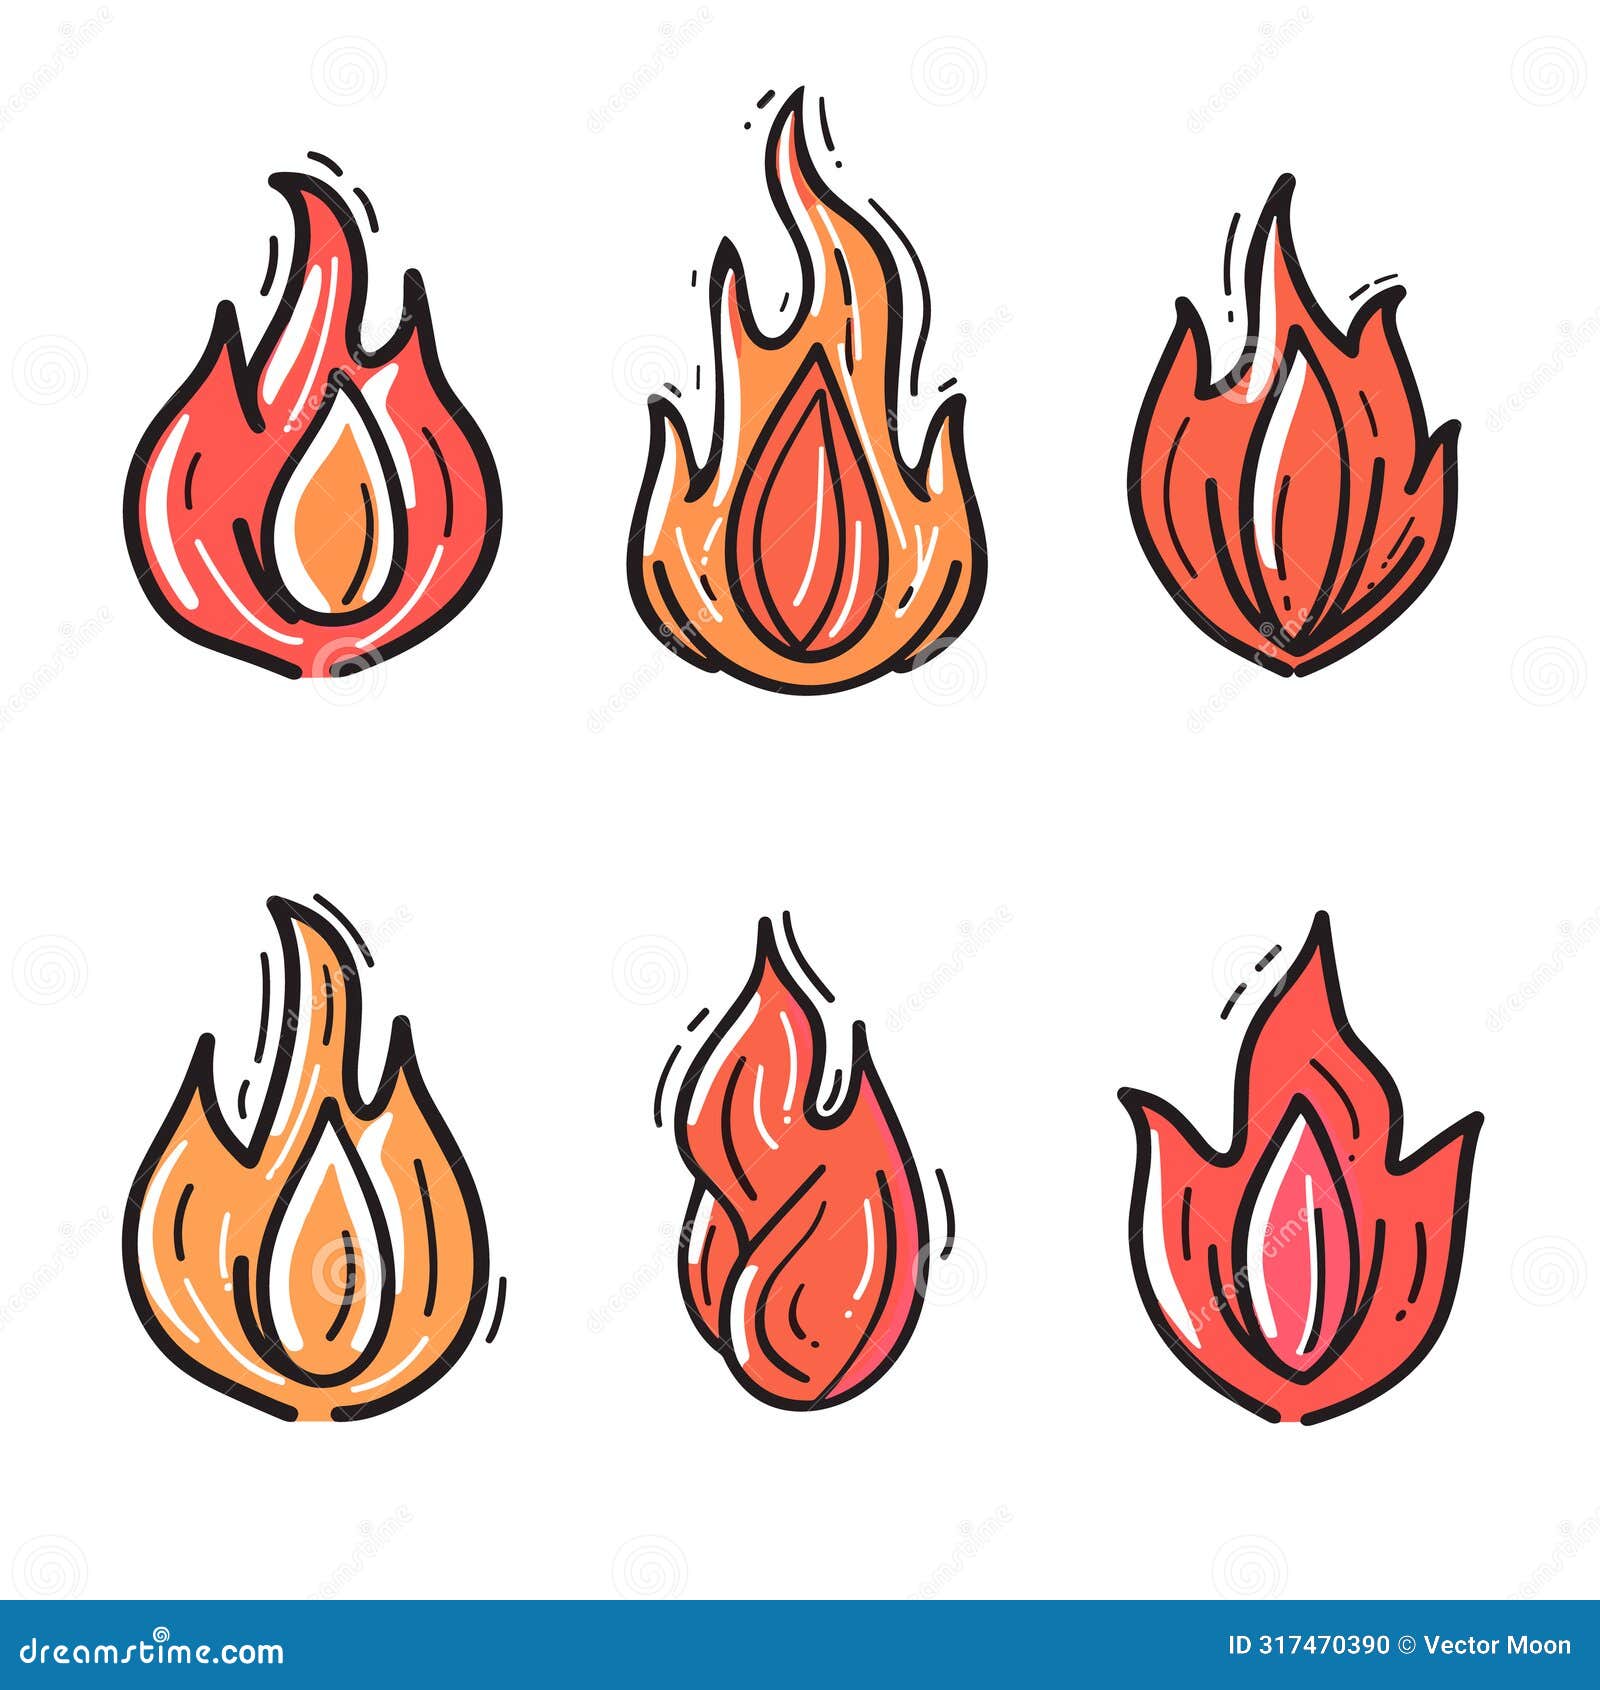 six vibrant fire flame icons presented handdrawn style. cartoon fire flames detailed orange red